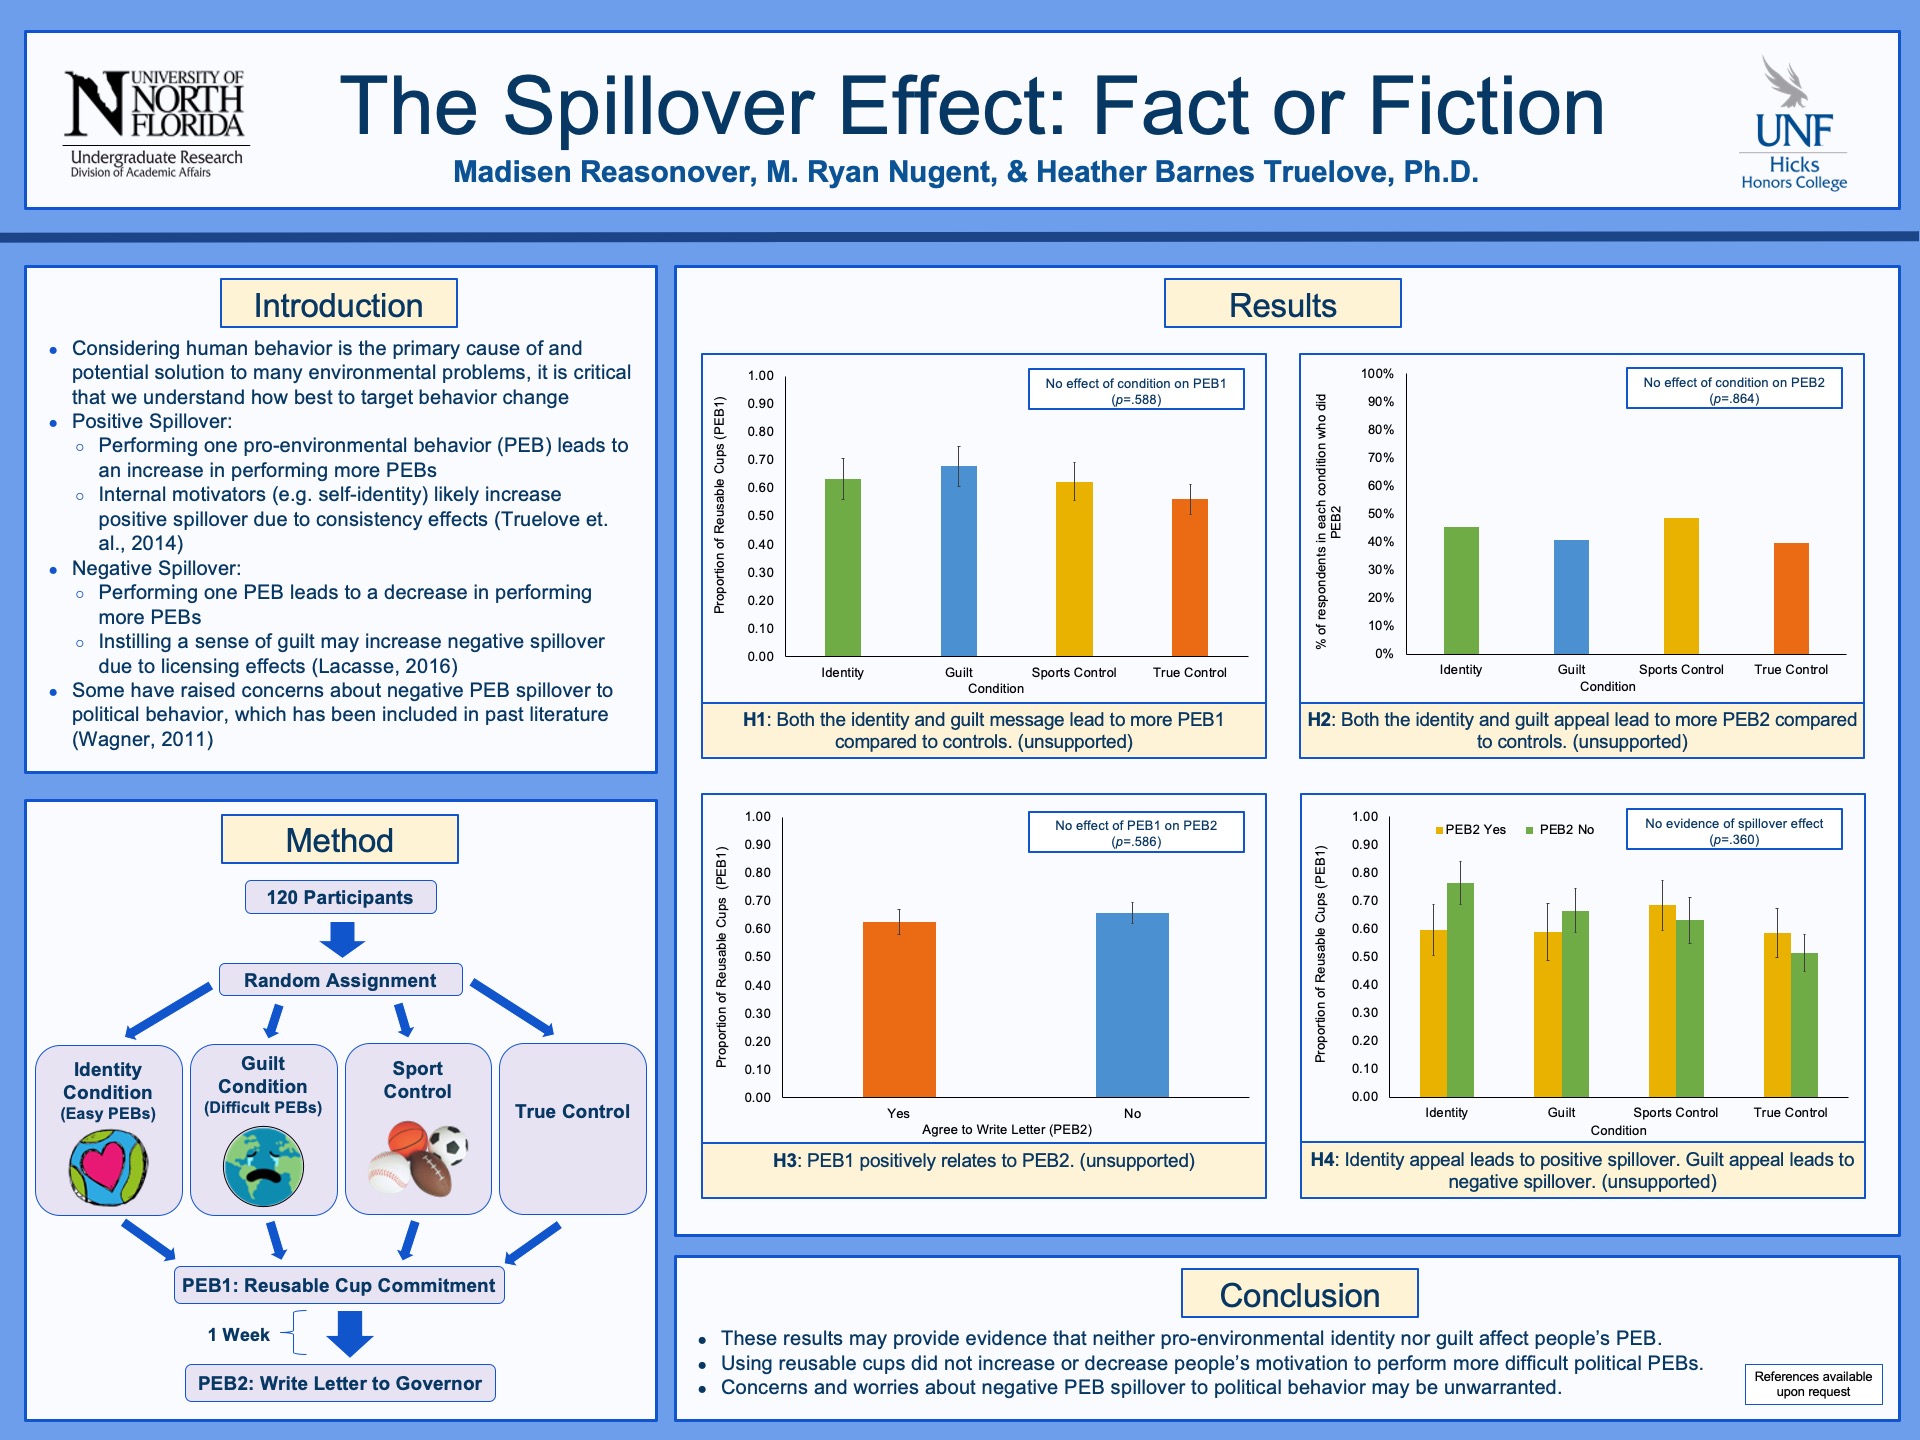 The Spillover Effect: Fact or Fiction poster